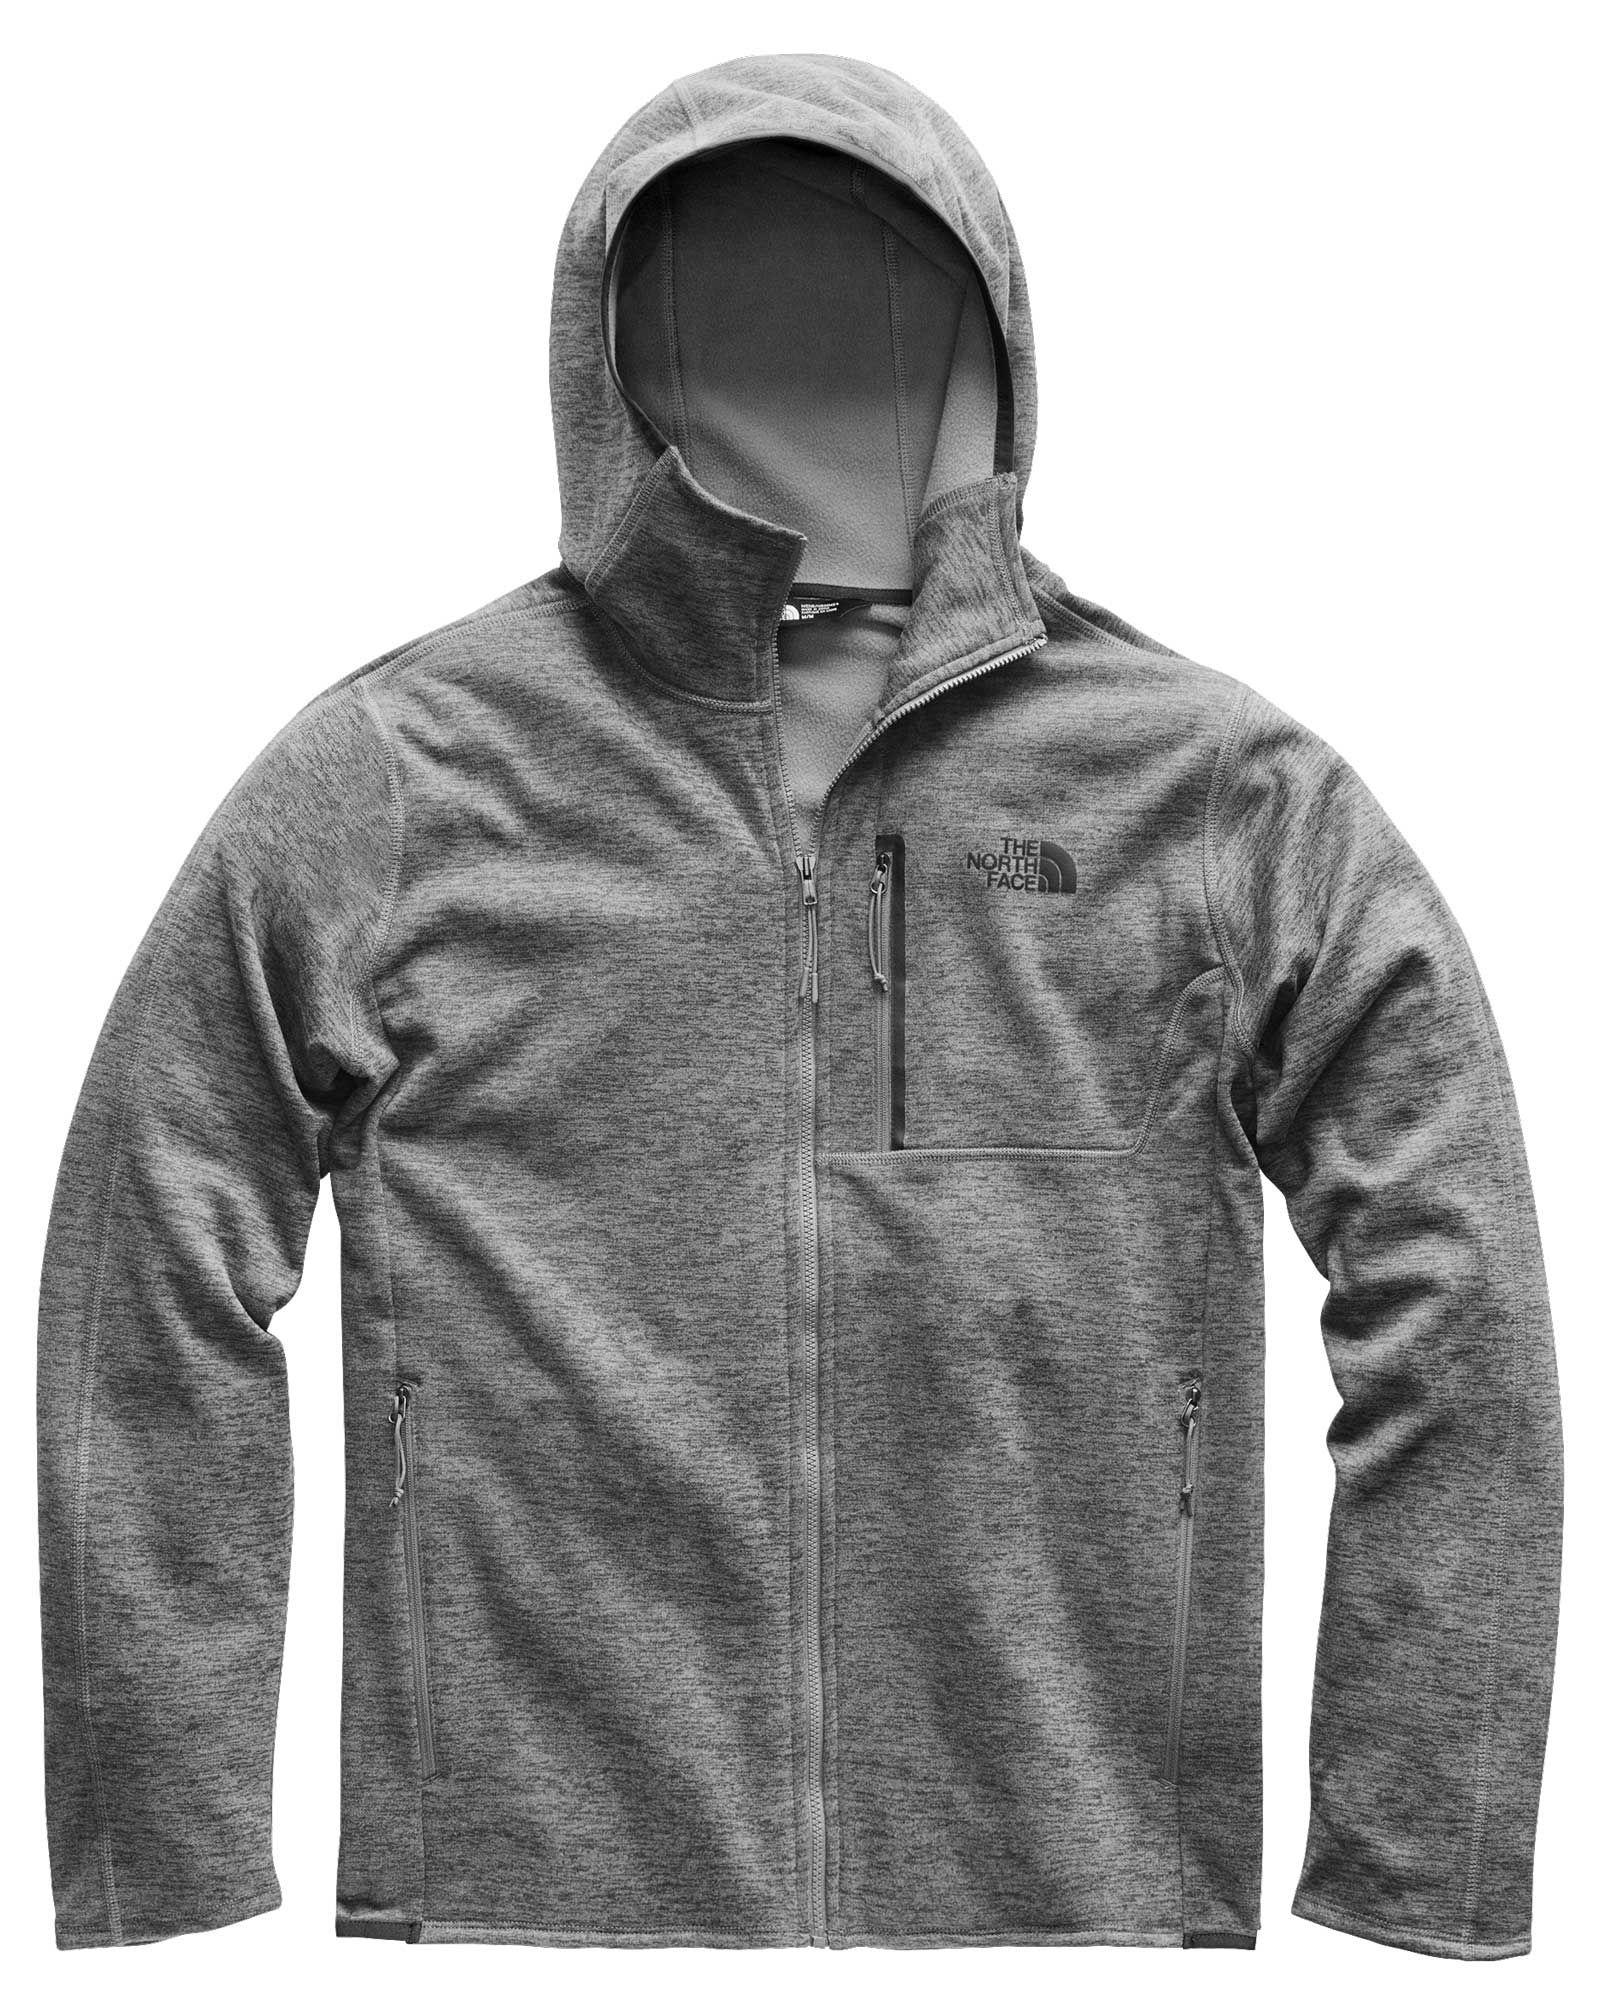 The North Face Canyonlands Full Zip Hoodie in Gray for Men - Lyst